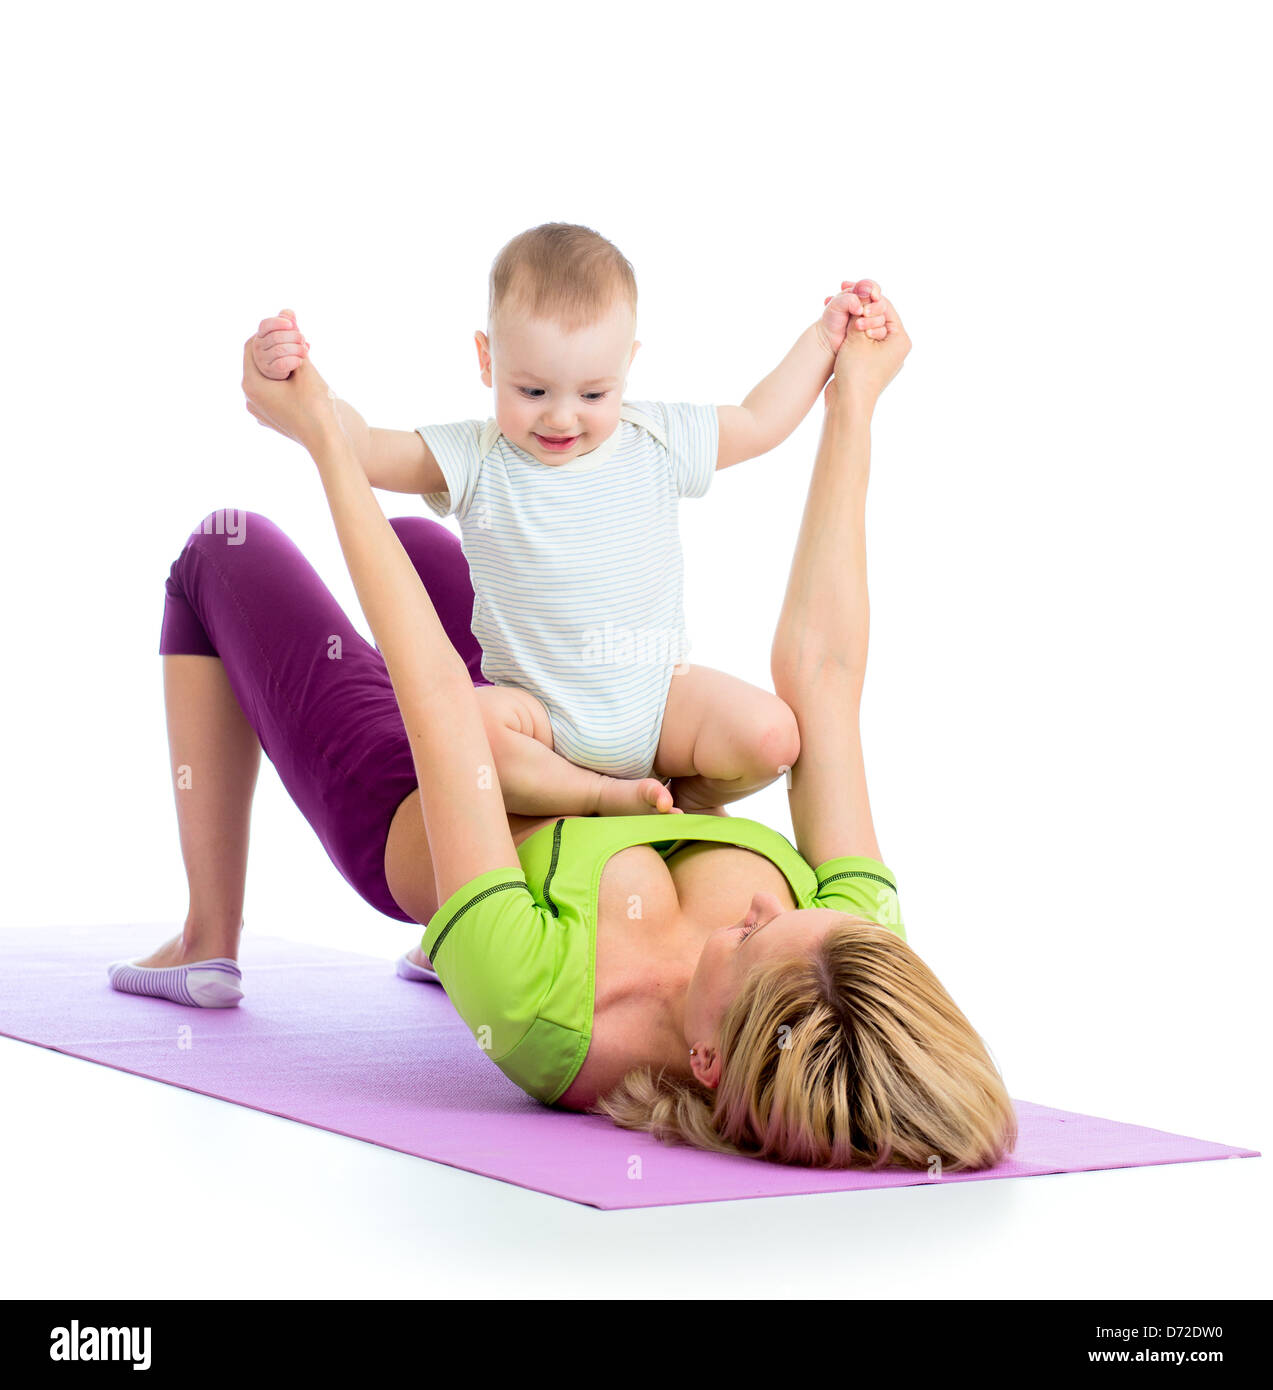 mother with baby doing gymnastics and fitness exercises Stock Photo